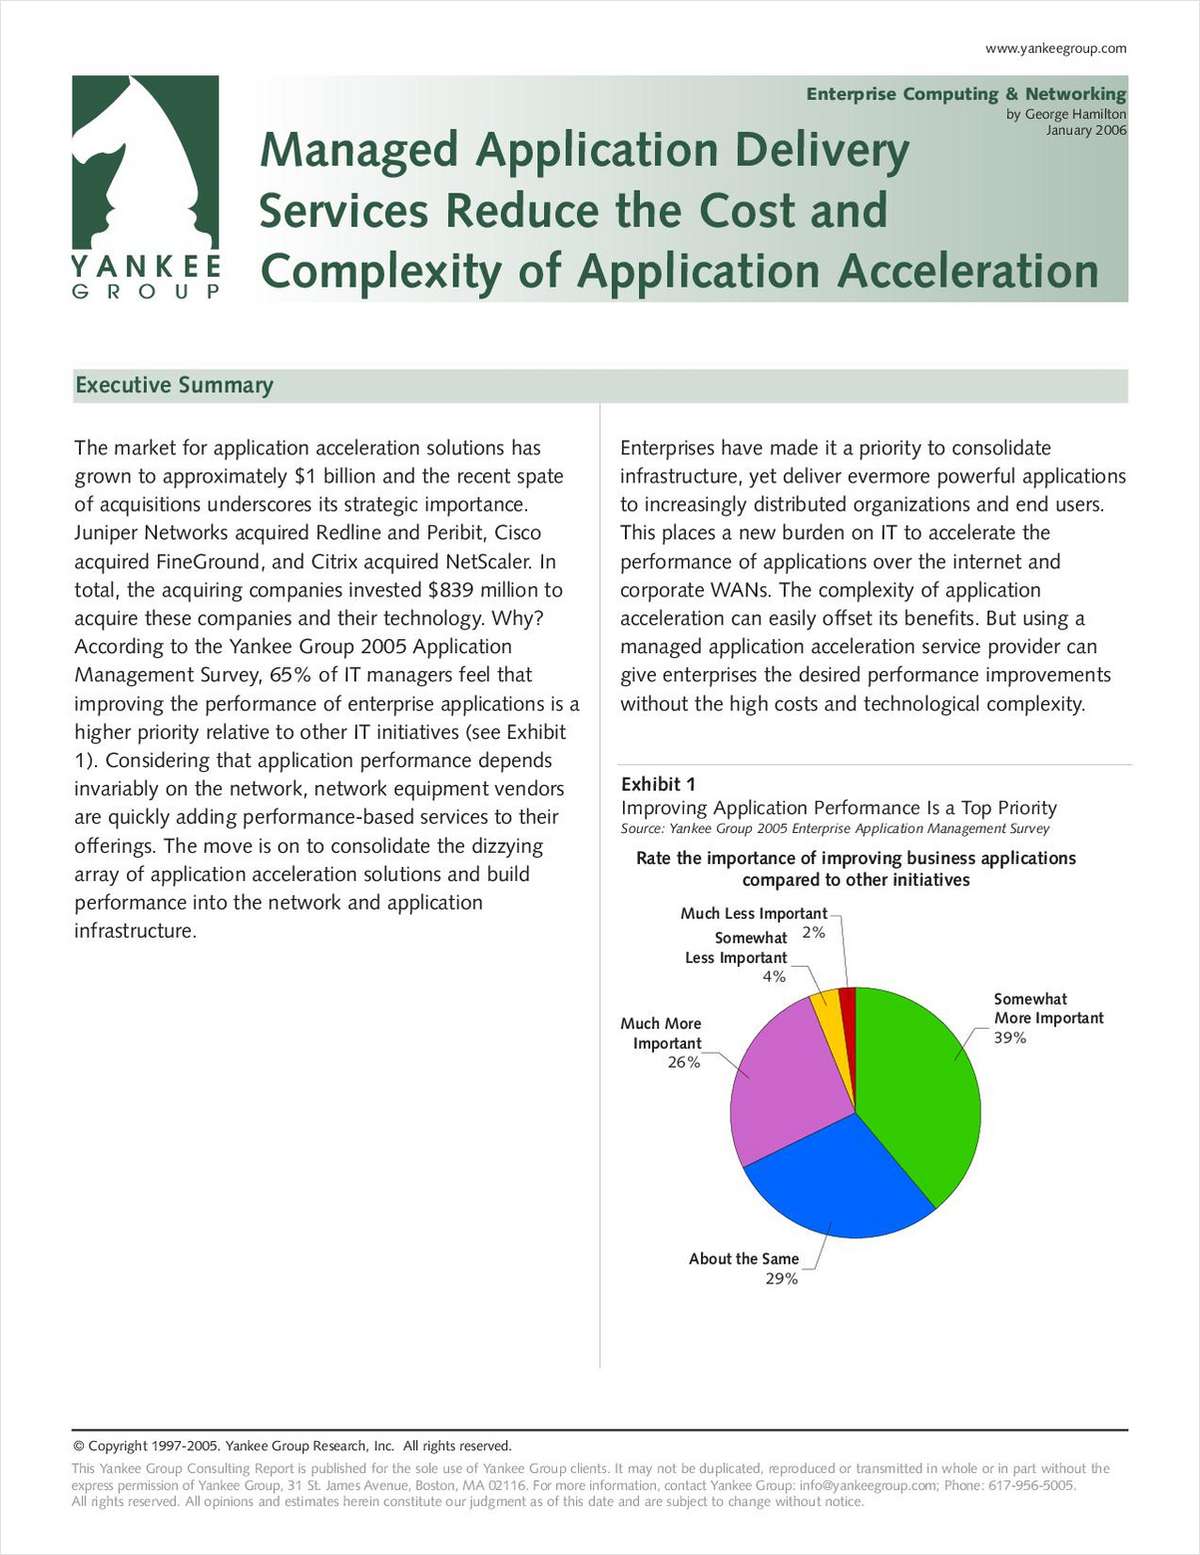 Application Acceleration: How to Reduce the Cost and Complexity with Managed Application Delivery Services